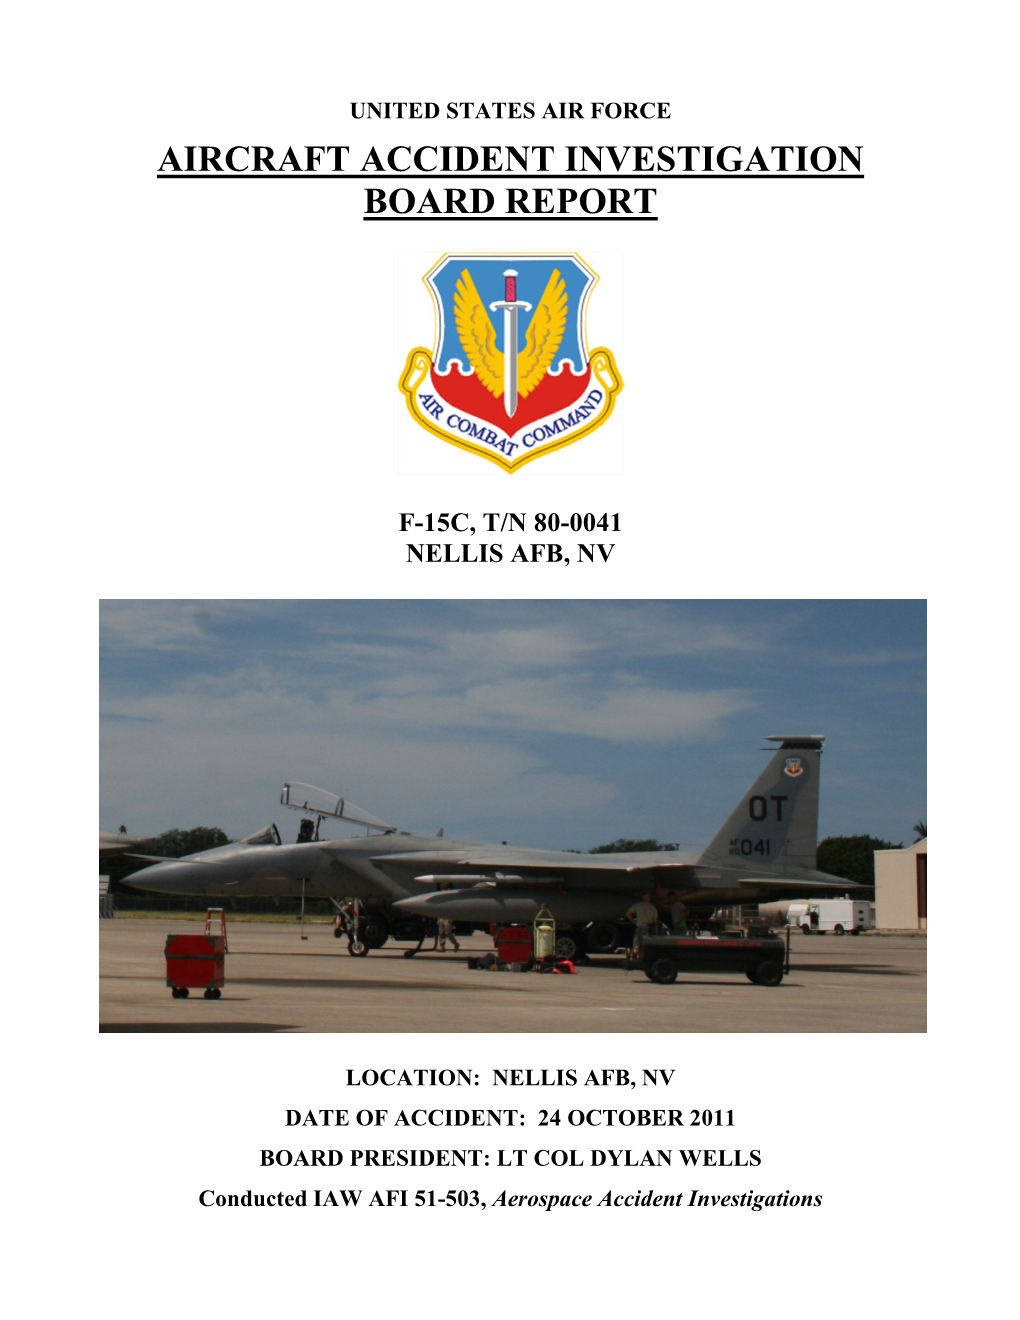 Aircraft Accident Investigation Board Report